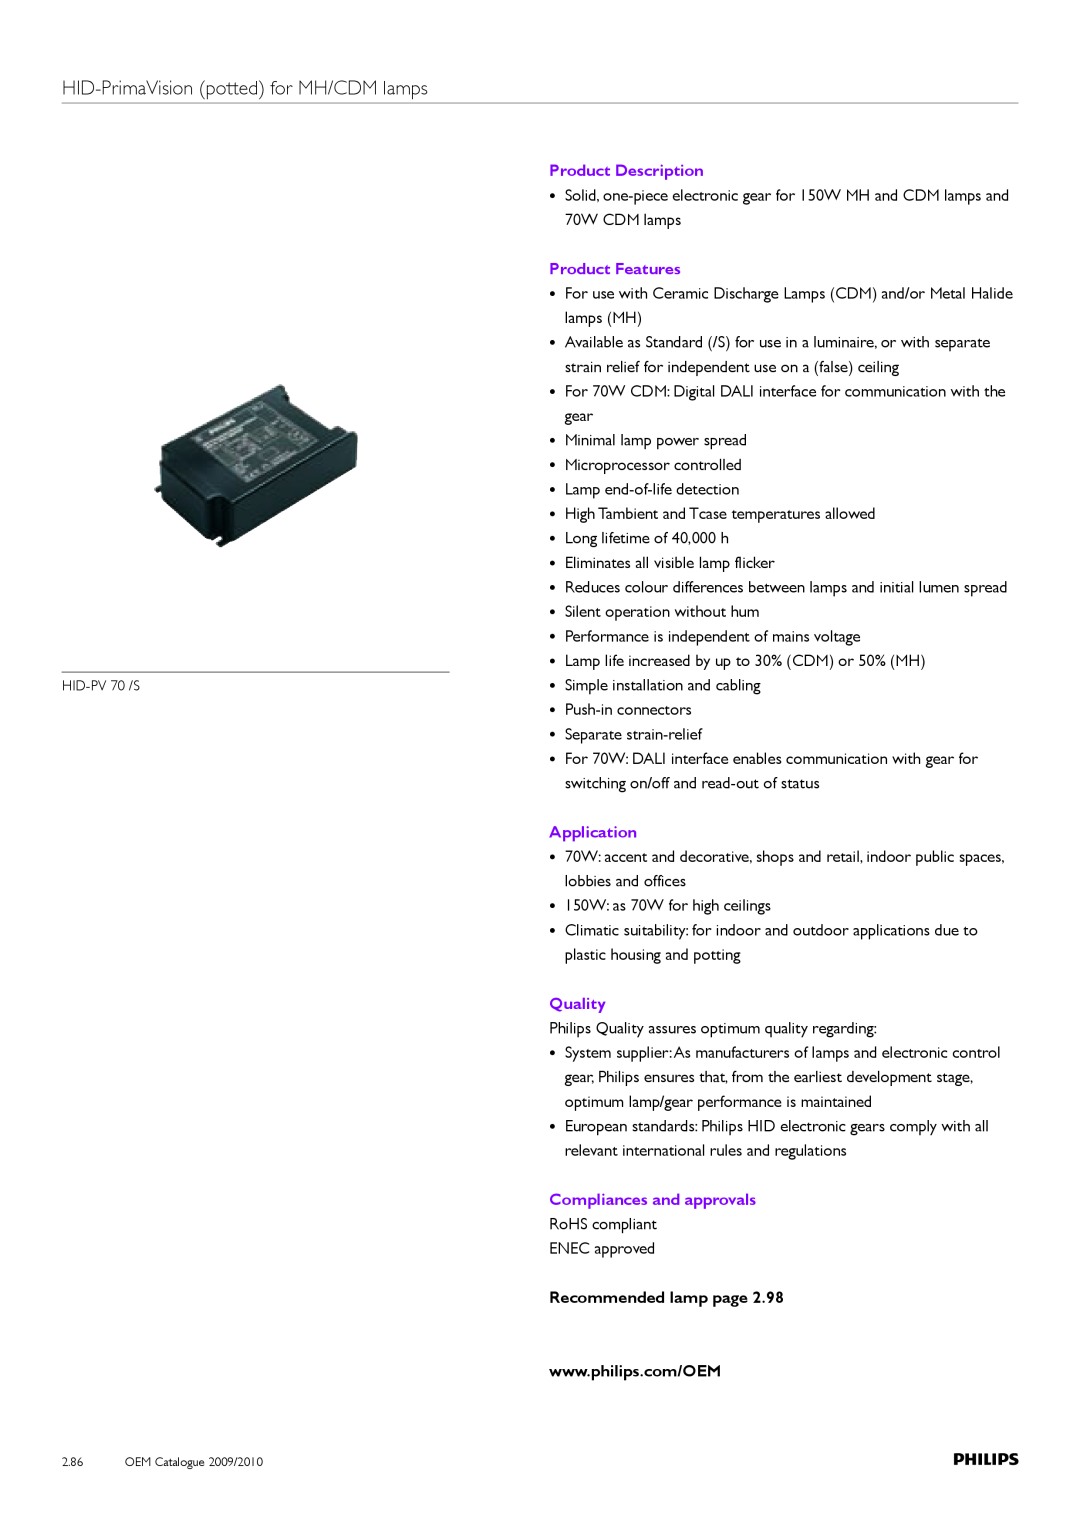 Philips Compact HID Lamp and Gear HID-PrimaVisionpotted for MH/CDM lamps, Product Description, Product Features, Quality 